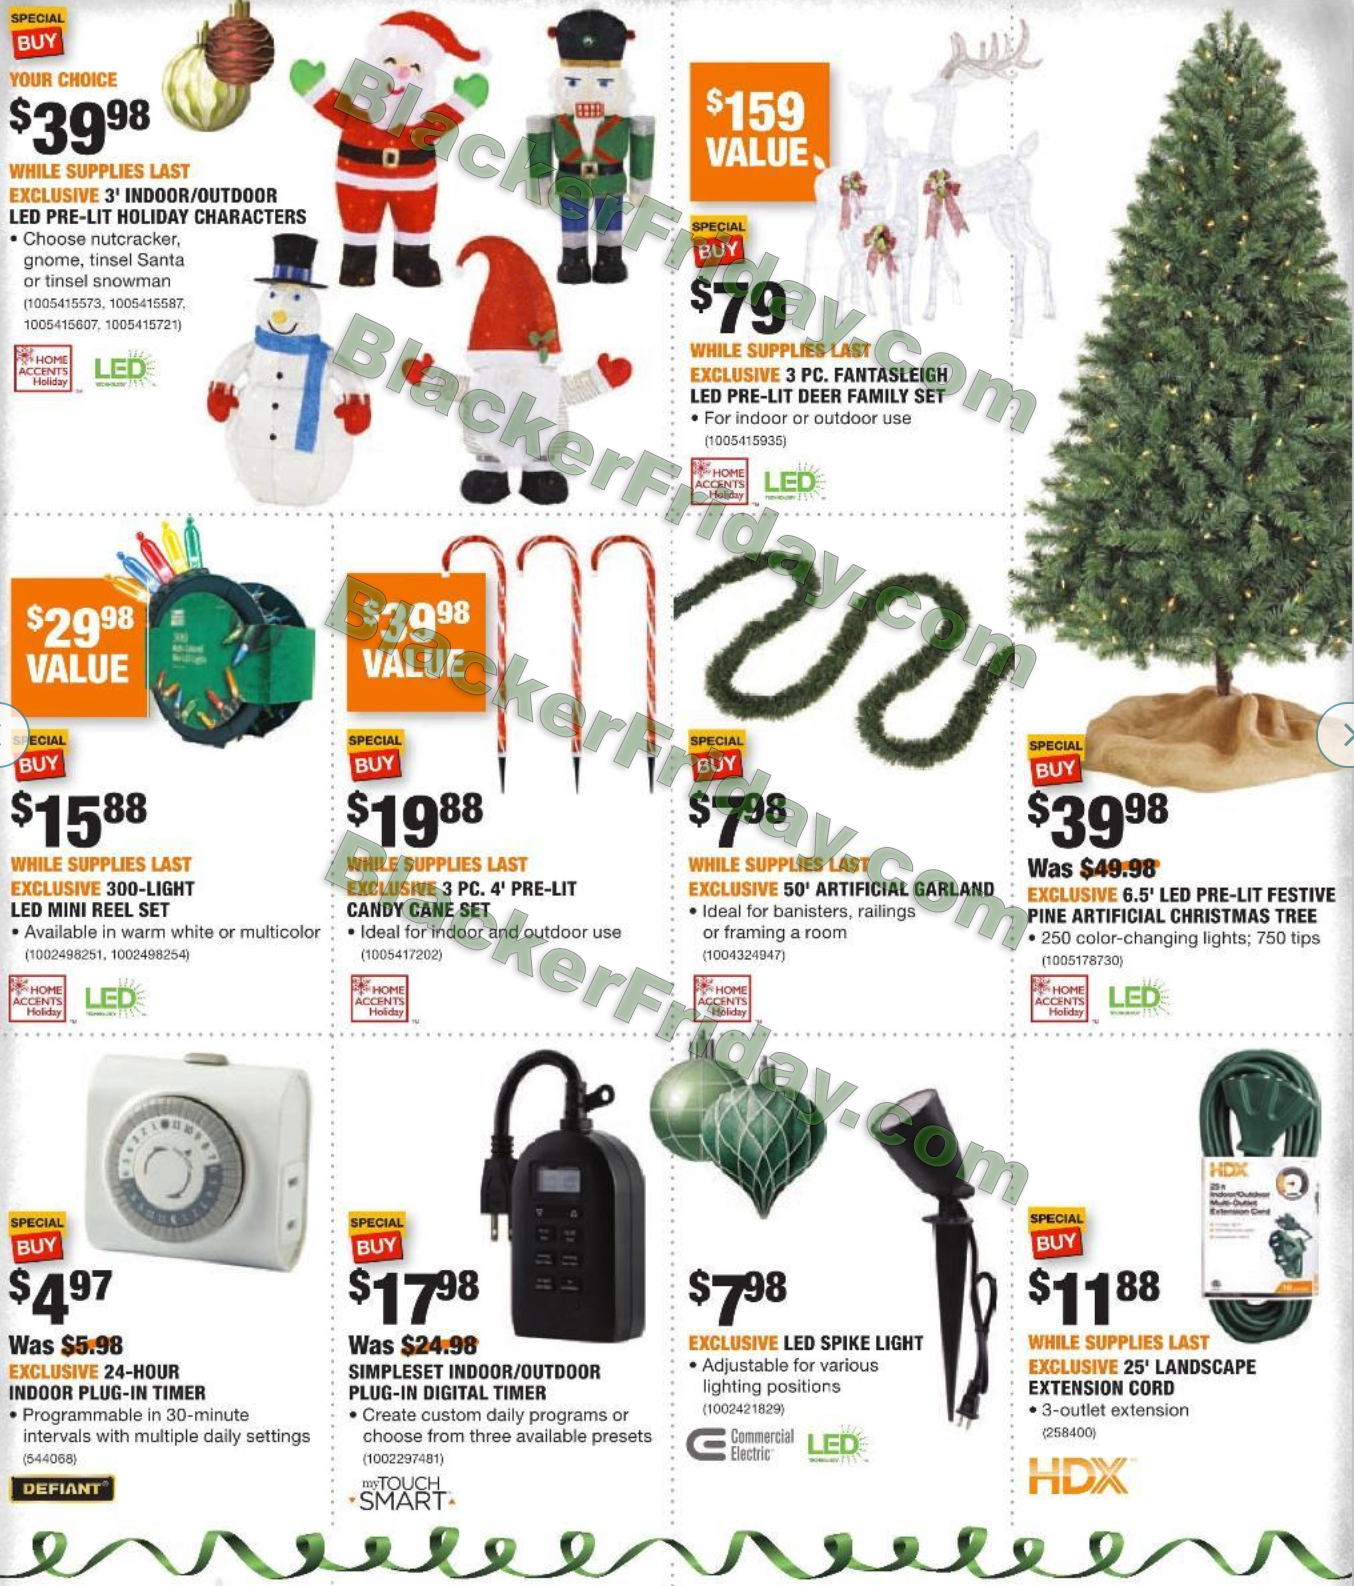 Home Depot Black Friday 2021 Sale - What to Expect ...